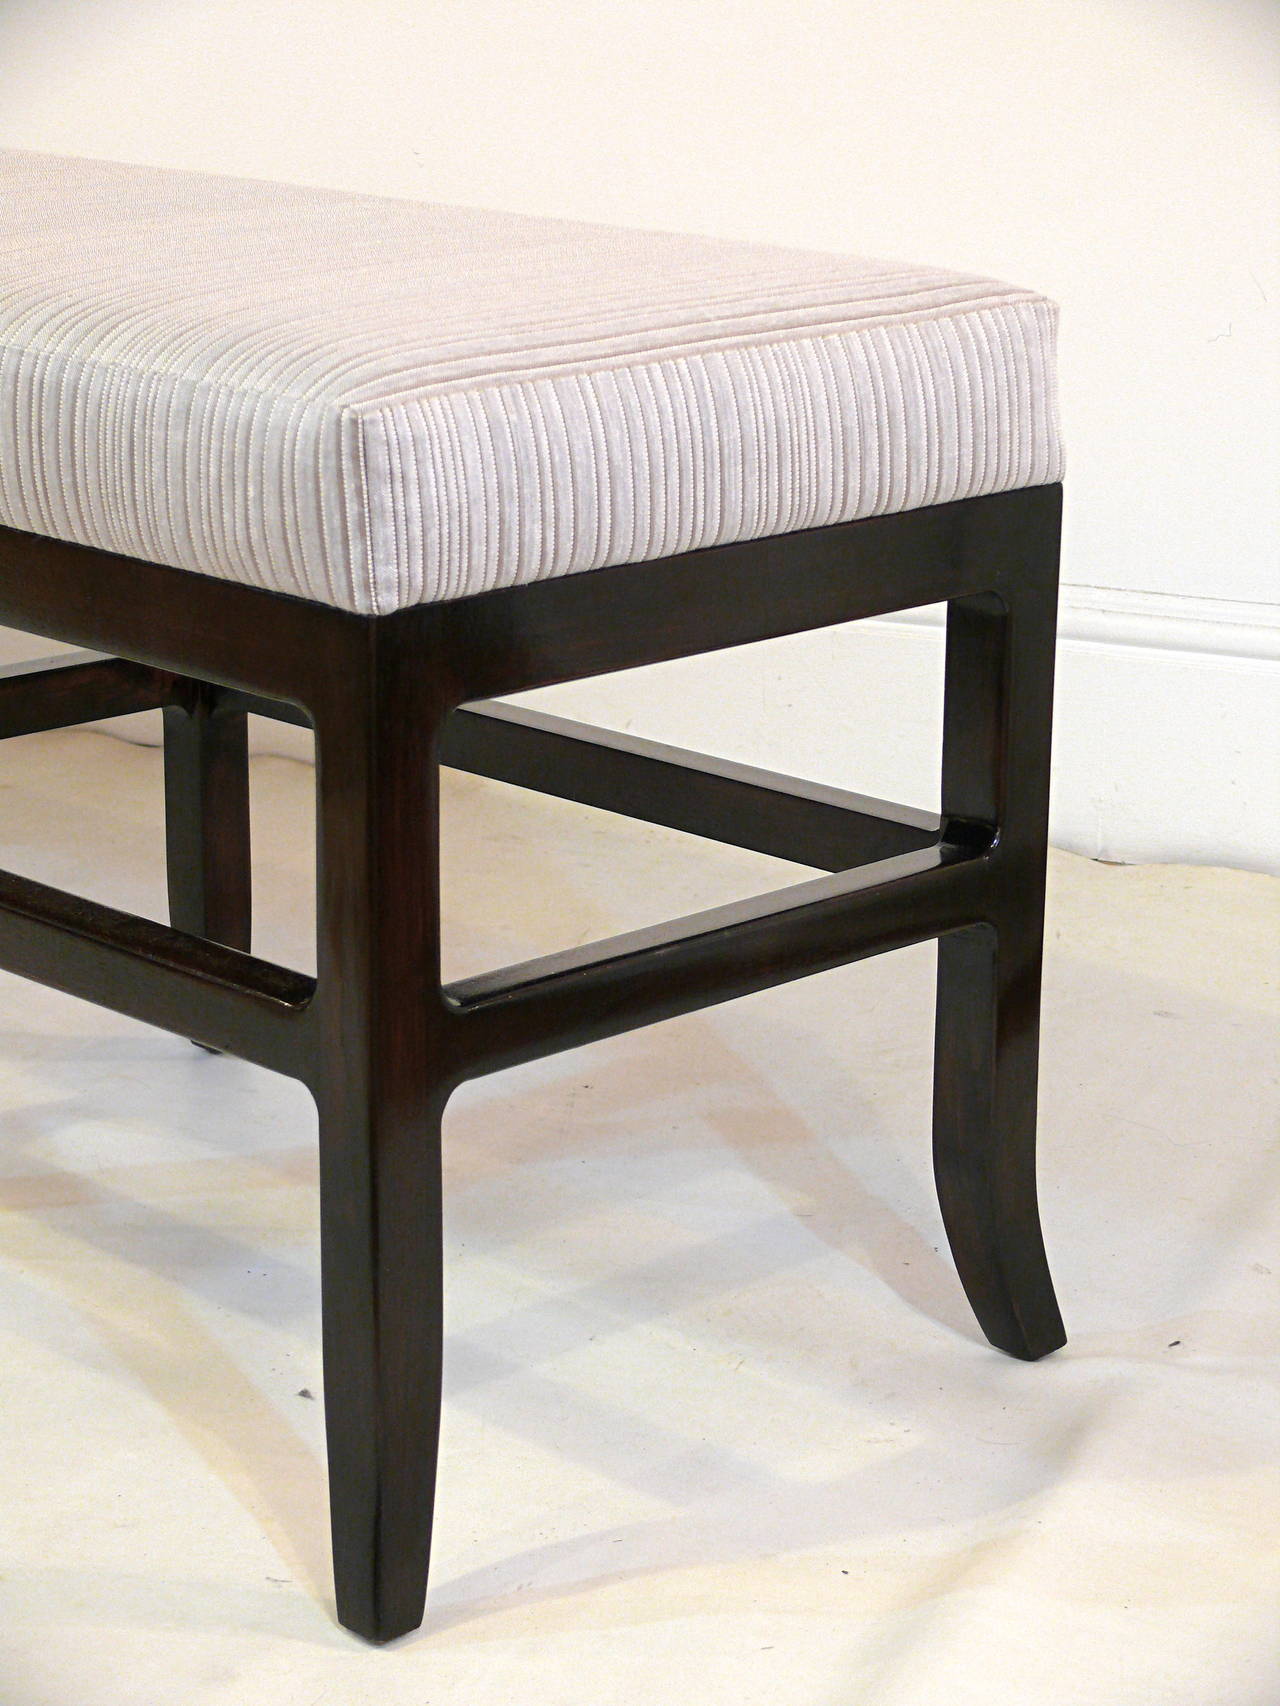 American Double Pedestal Splayed Leg Bench in the Manner of James Mont